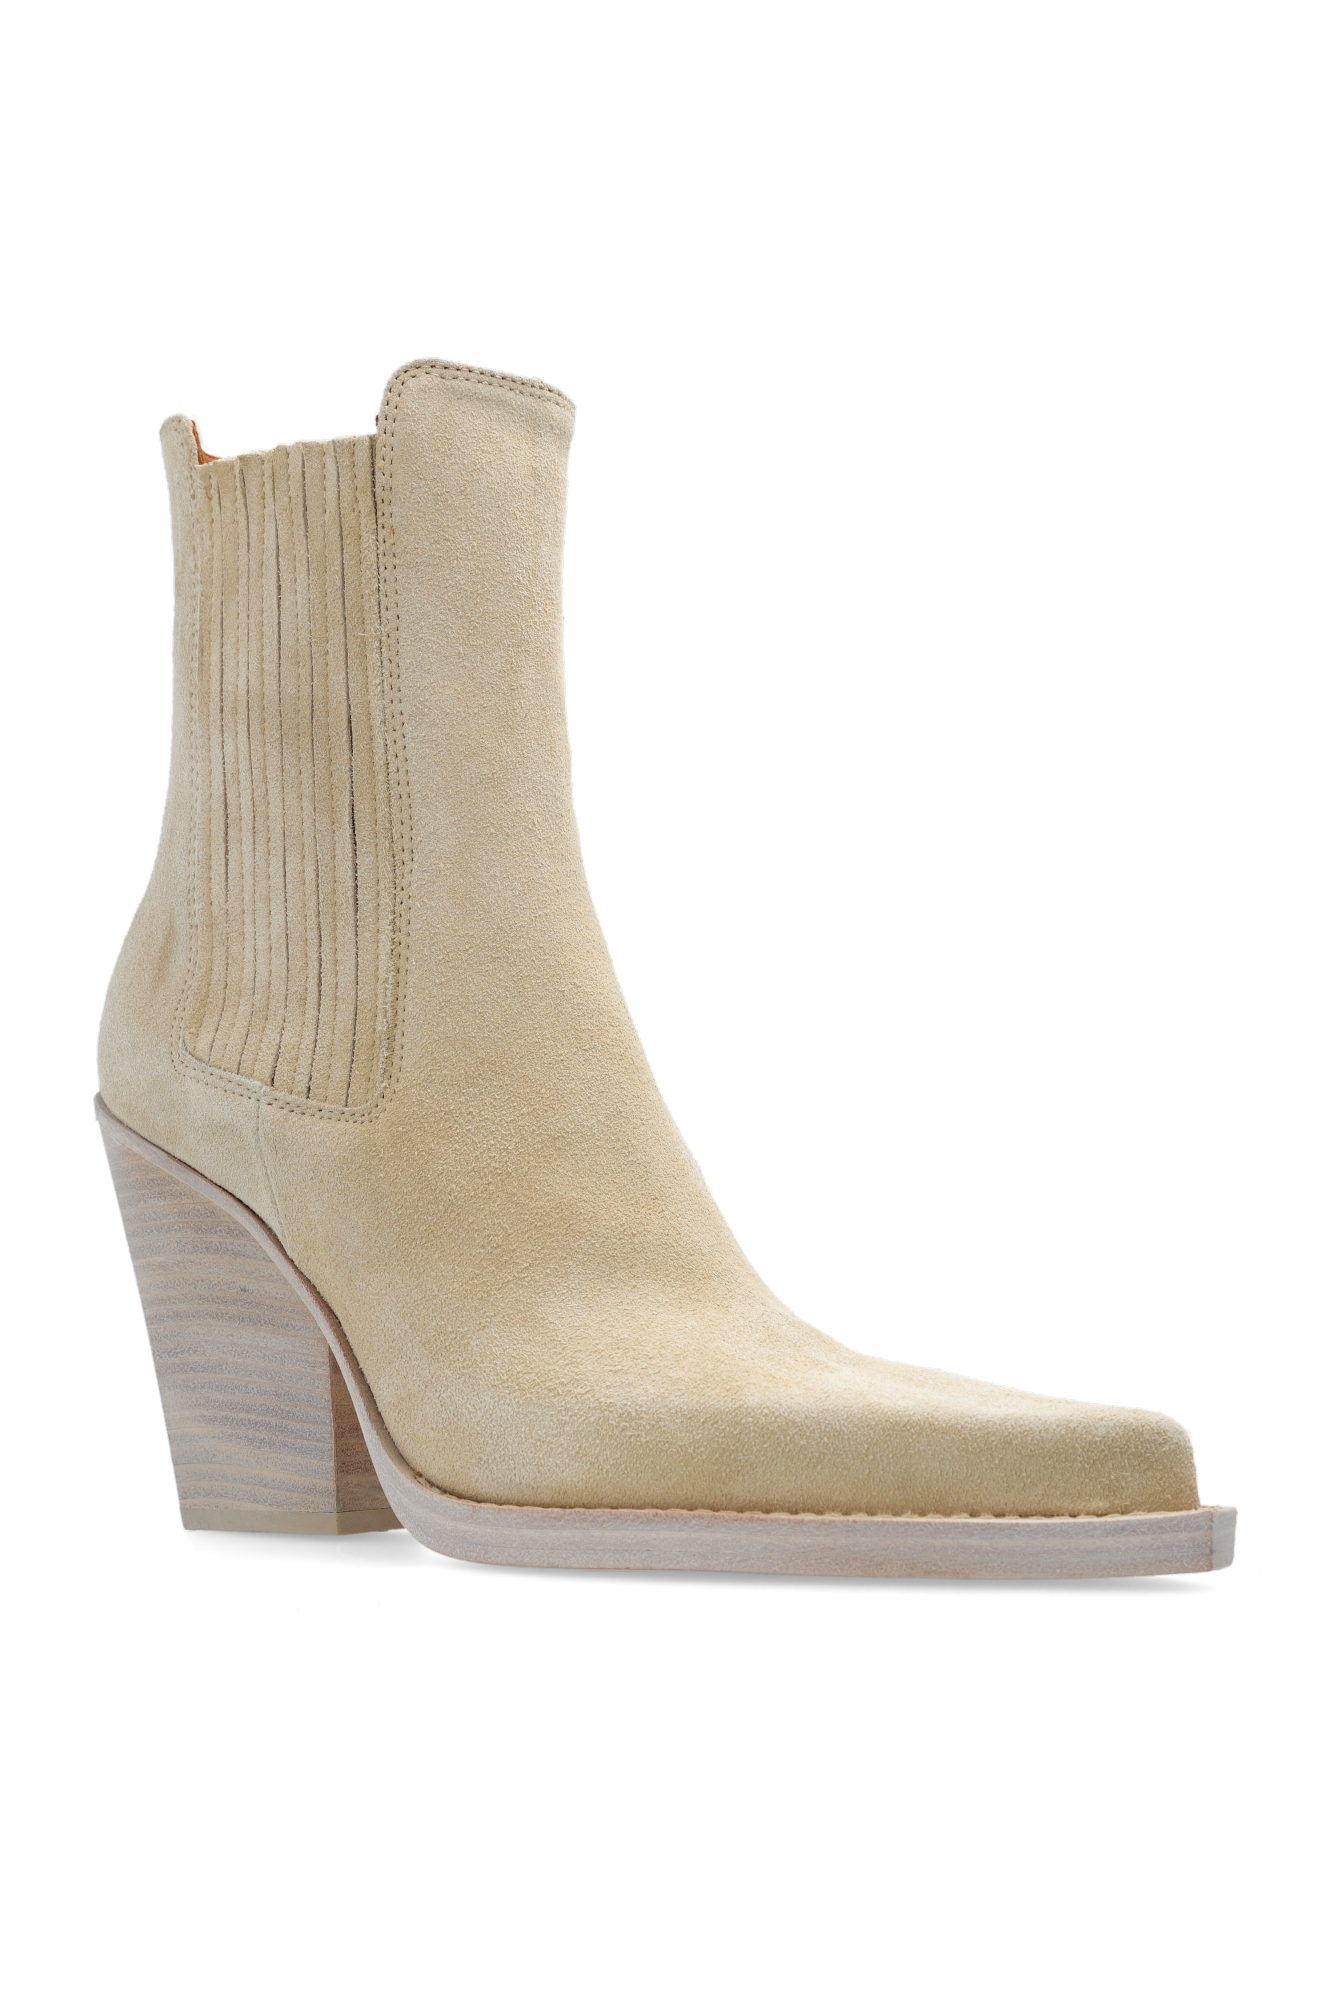 Paris Texas ‘Dallas’ heeled ankle boots